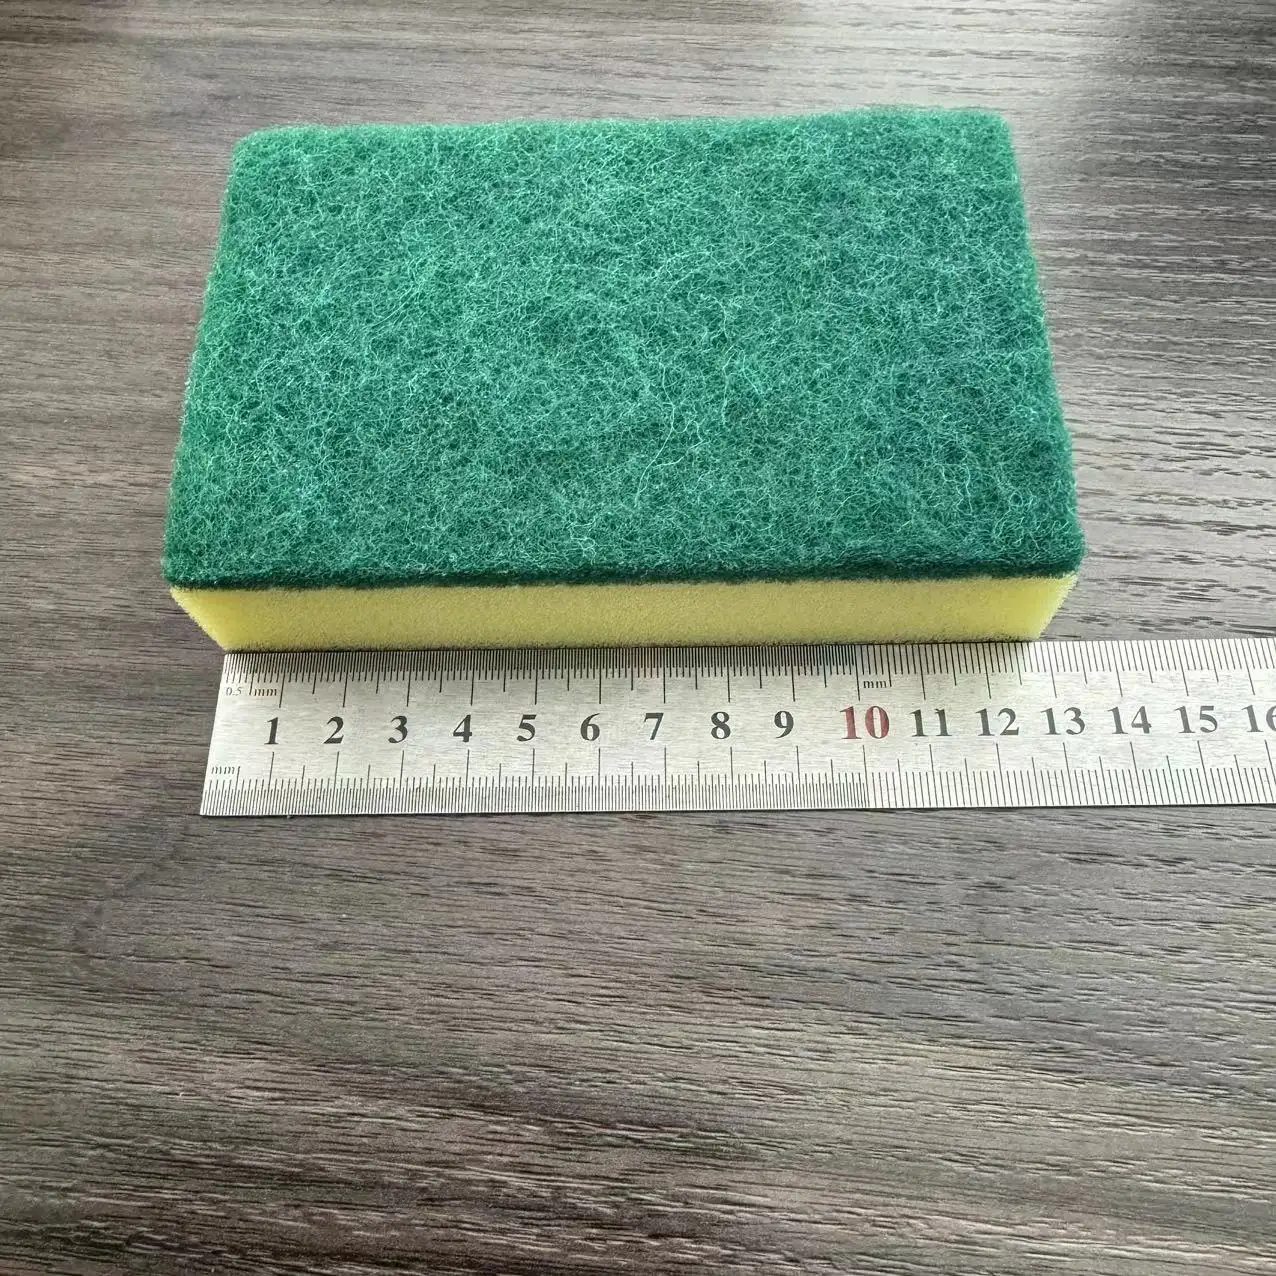 Kitchen Dish Cleaning Green Scouring Pad Sponge Scrubber